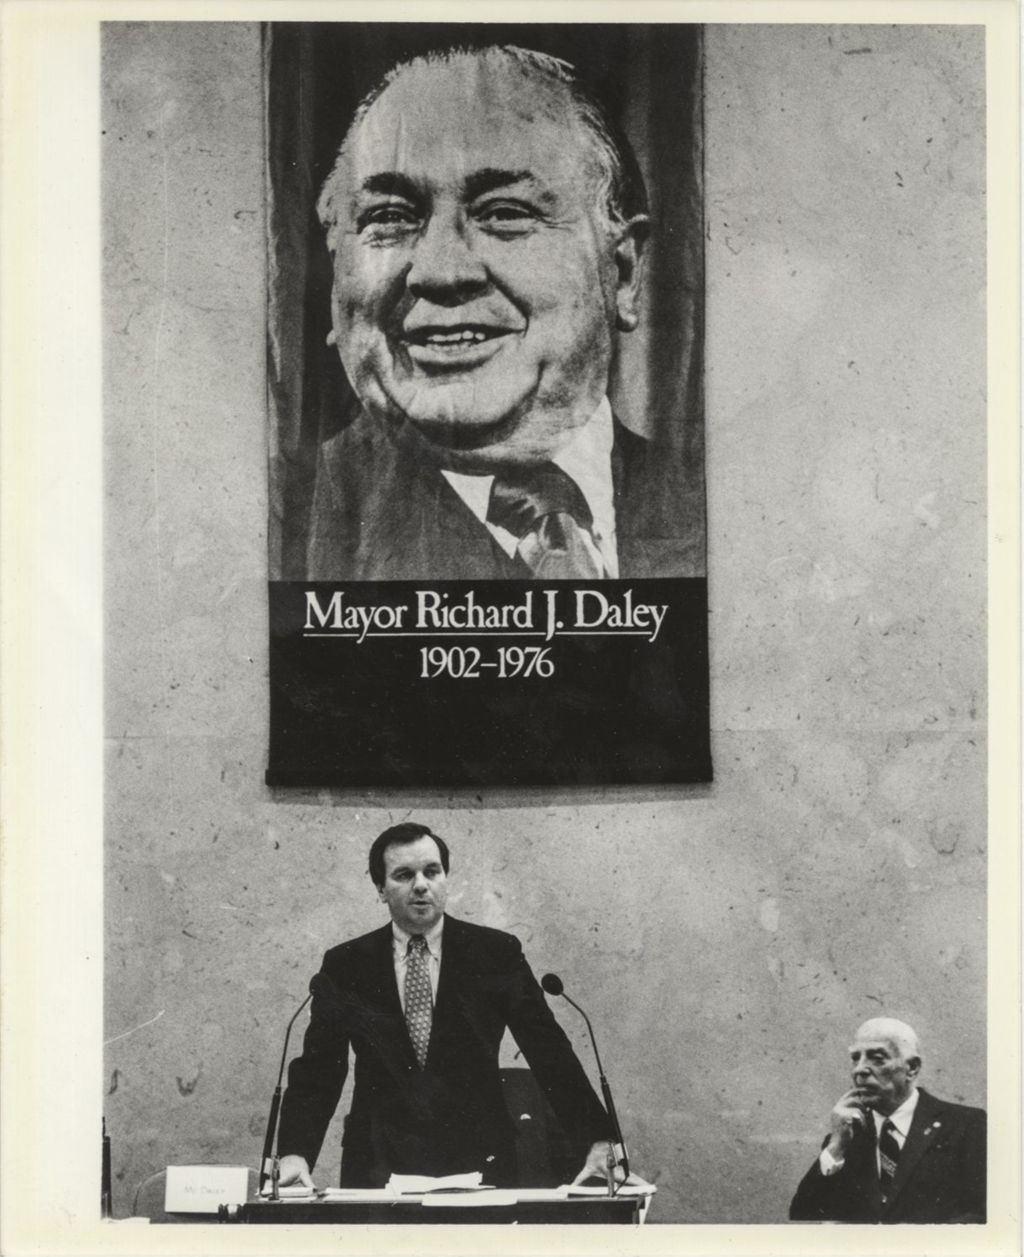 Richard M. Daley speaking in front of a memorial poster of his father